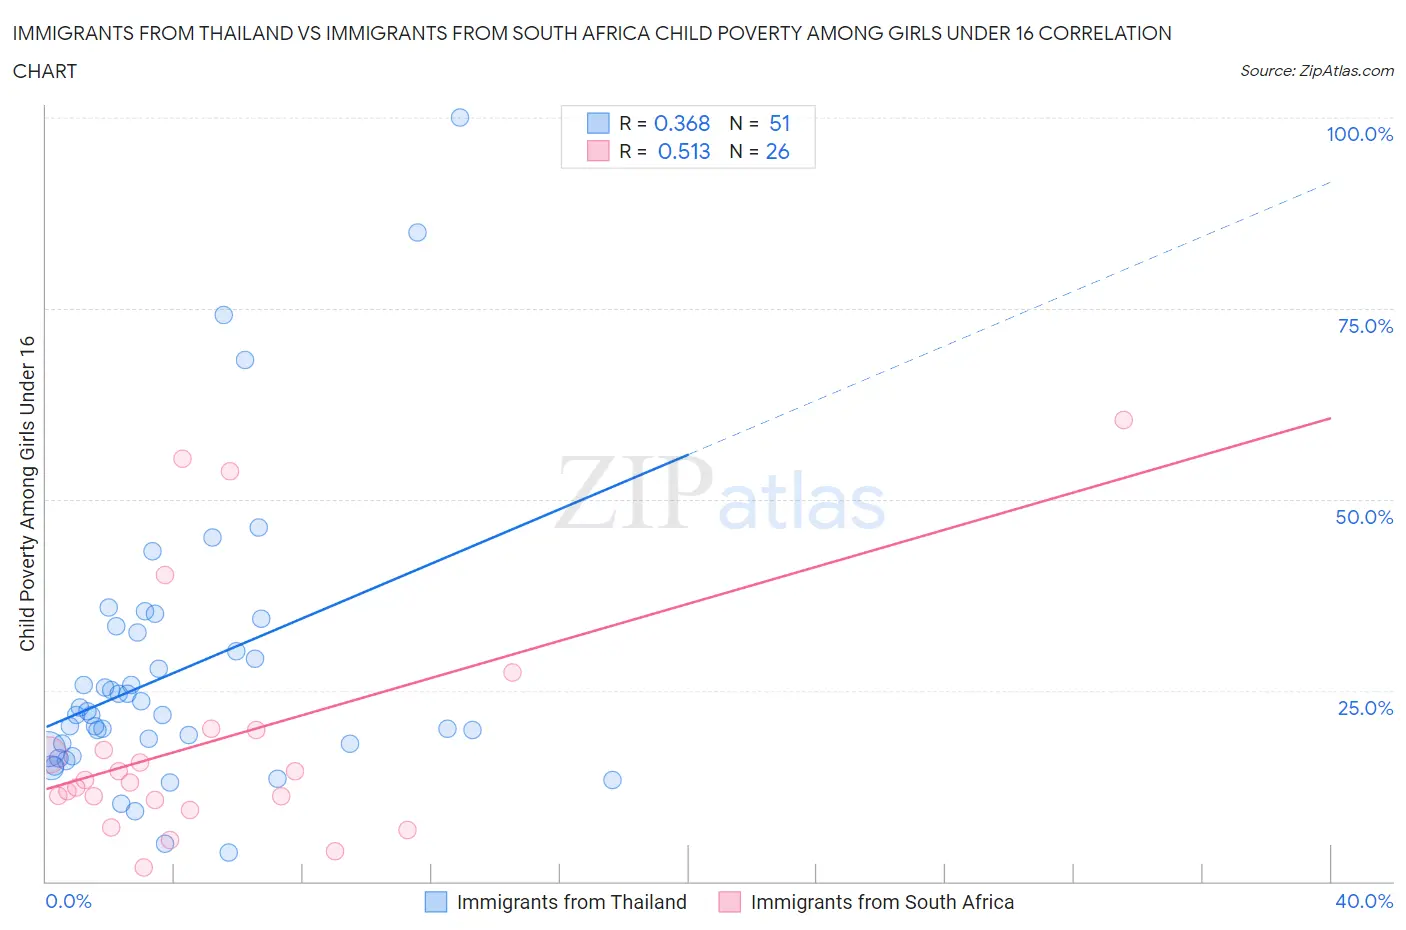 Immigrants from Thailand vs Immigrants from South Africa Child Poverty Among Girls Under 16